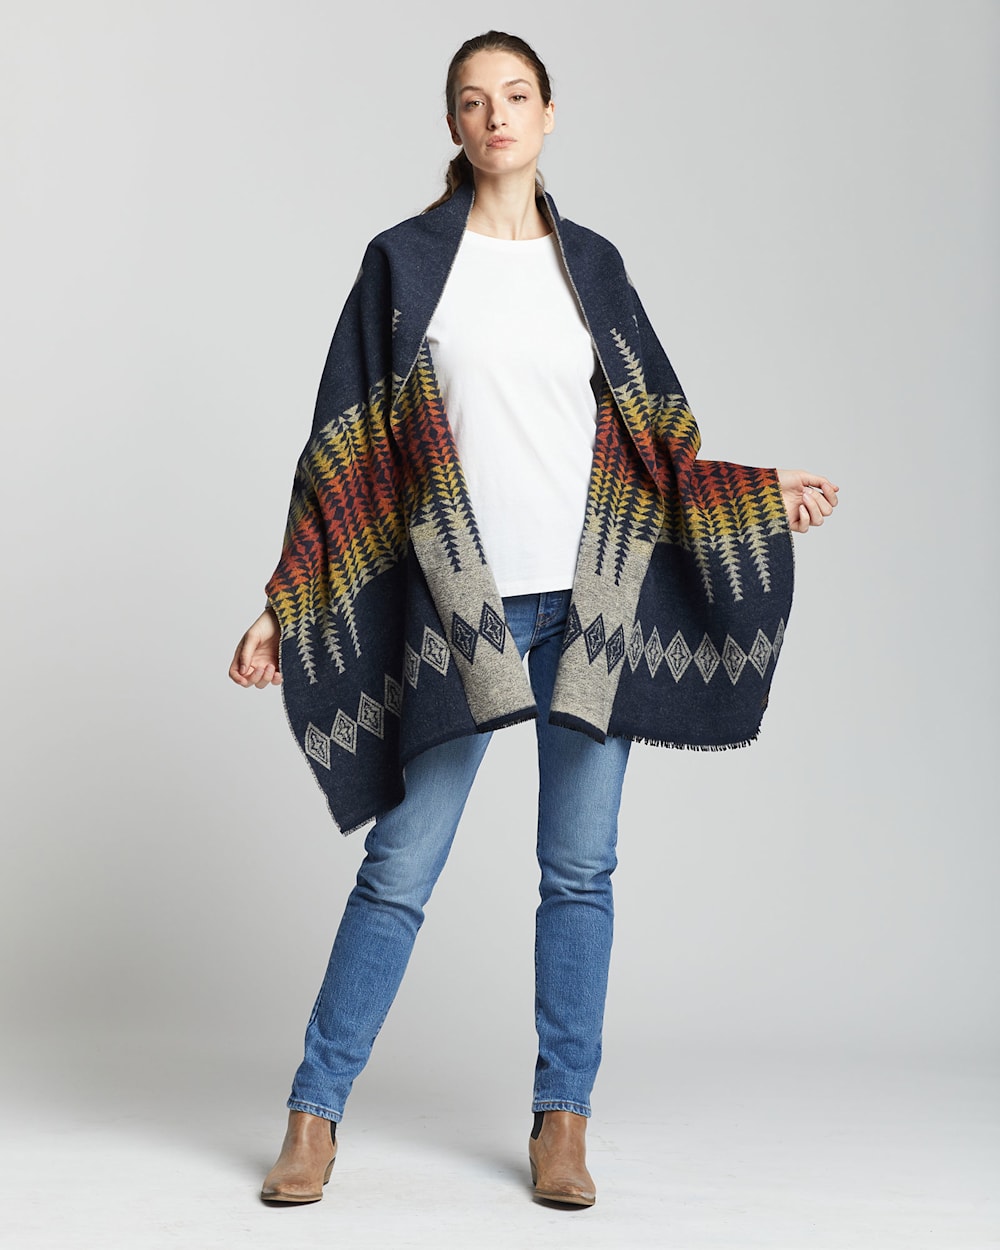 ALTERNATE VIEW OF OVERSIZED COTTON WRAP IN NAVY HARDING image number 4